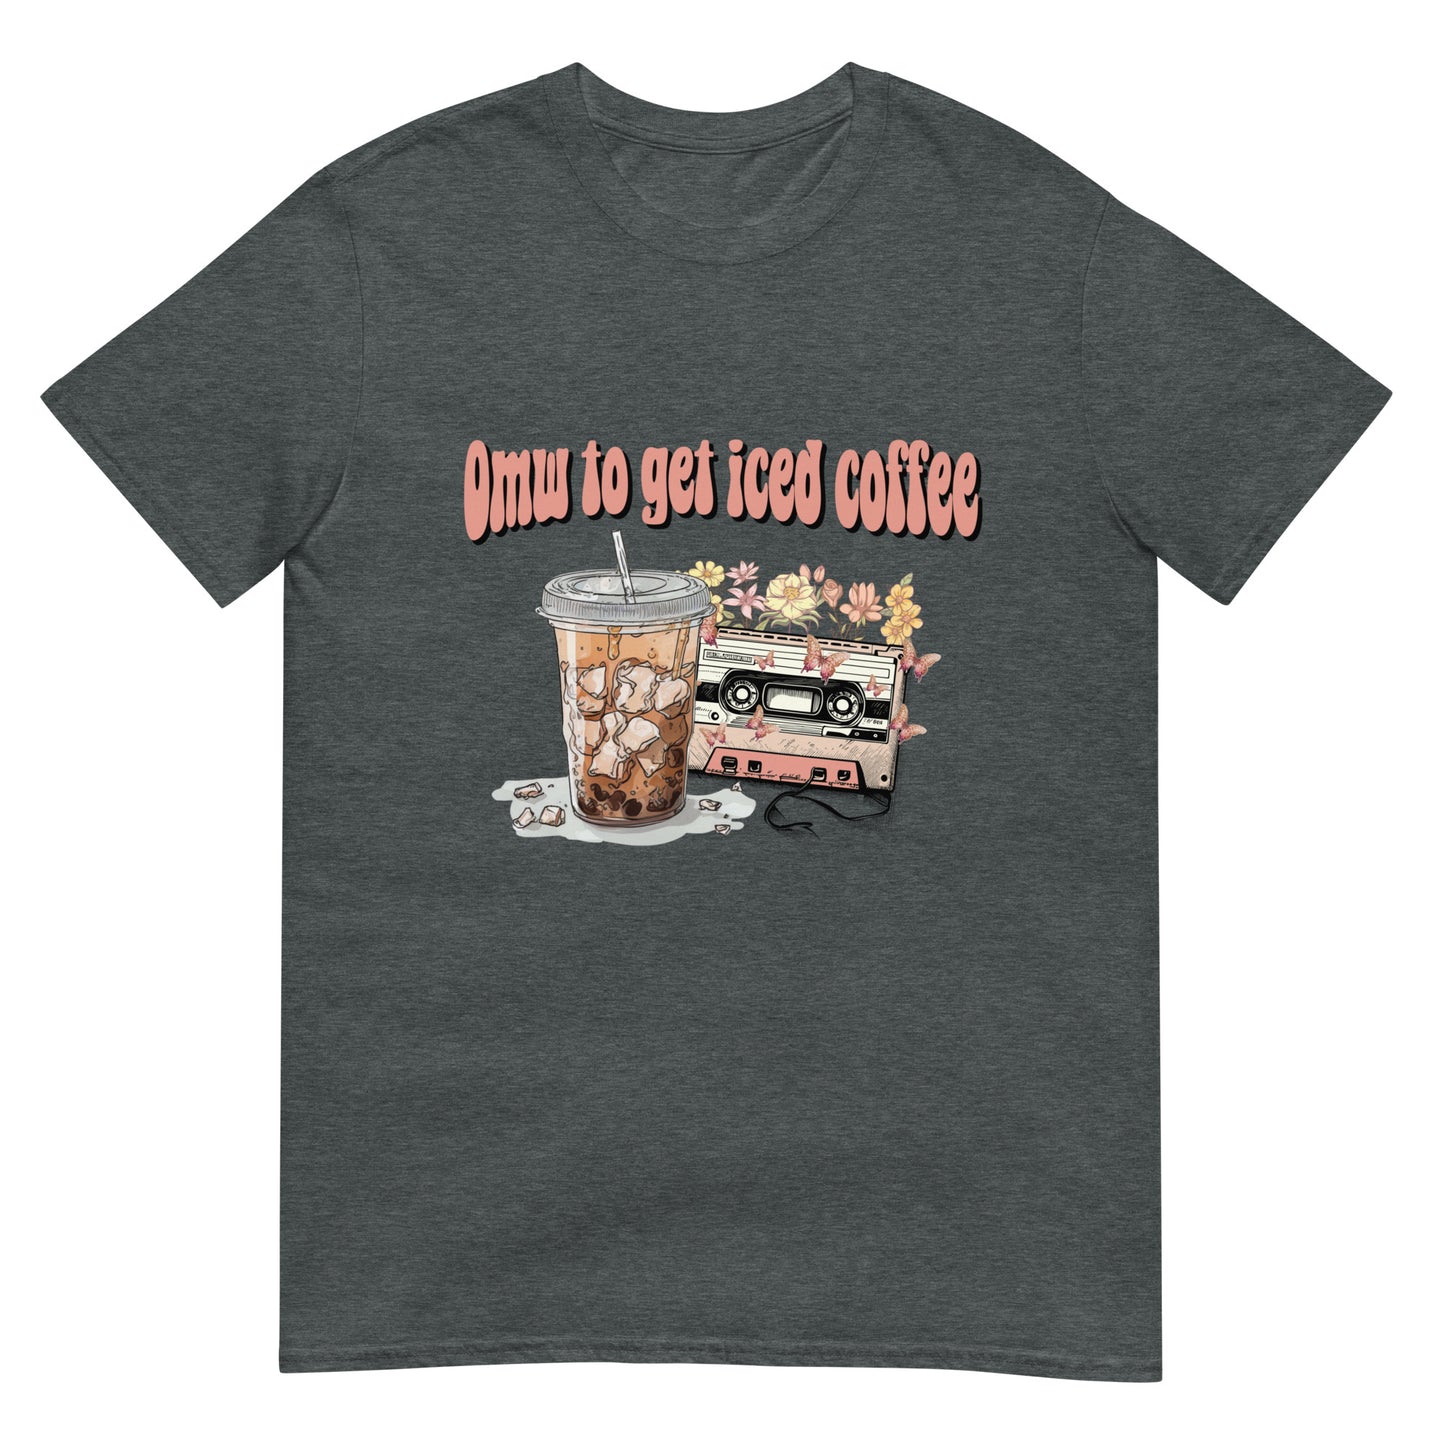 "OMW to get Iced Coffee" Unisex T-Shirt